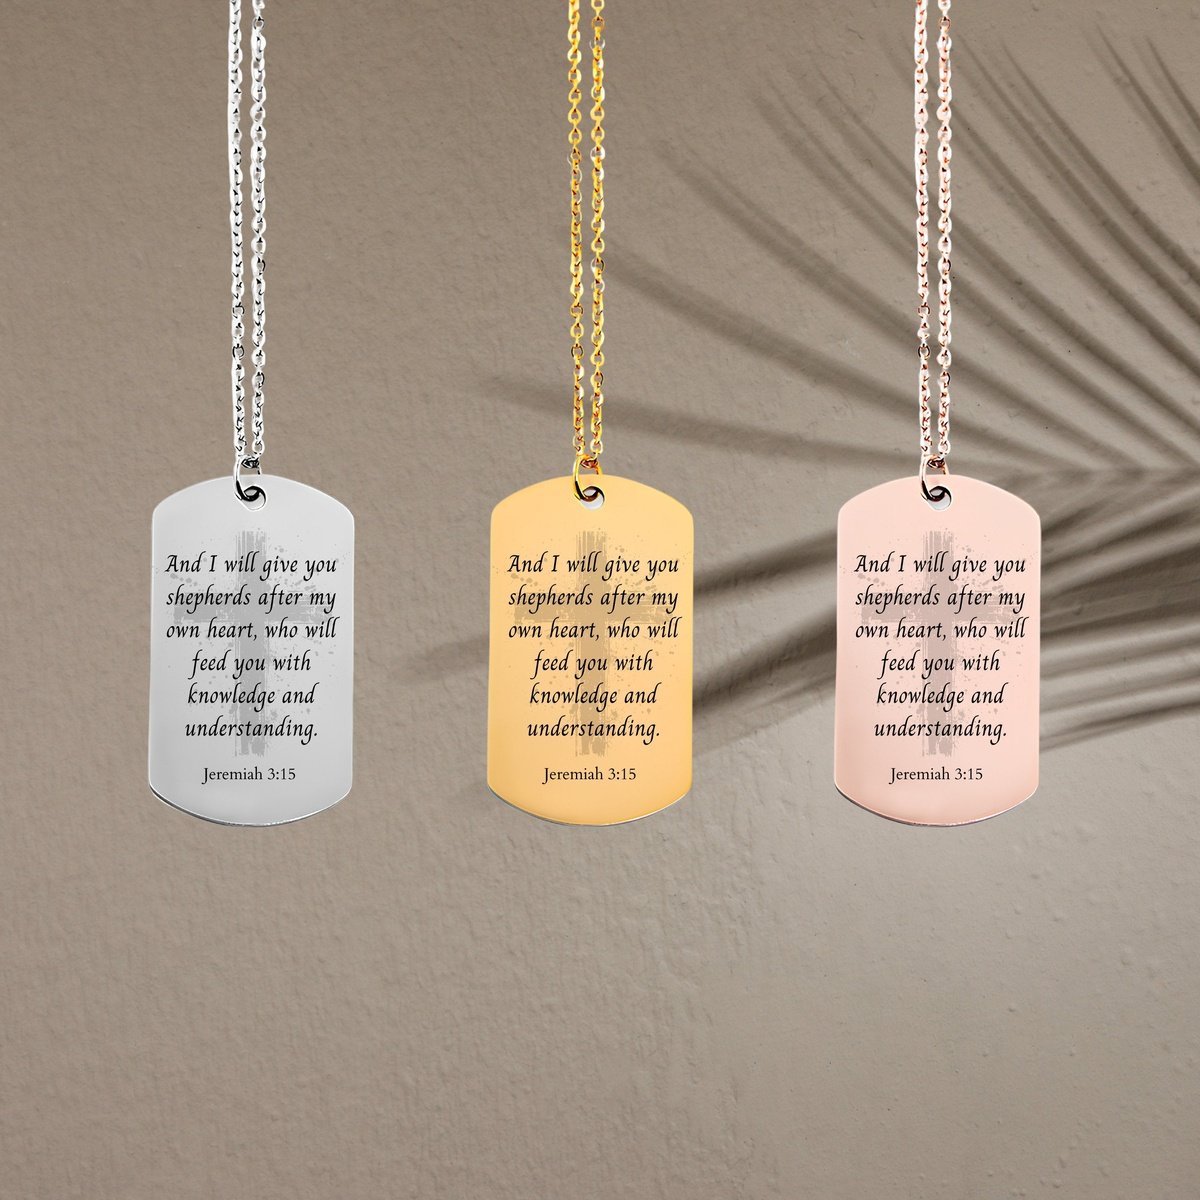 Jeremiah 3 15 quote necklace, gold bible verse, 14k gold cross charm necklace, confirmation gift, gold bar tag necklace, religious scripture